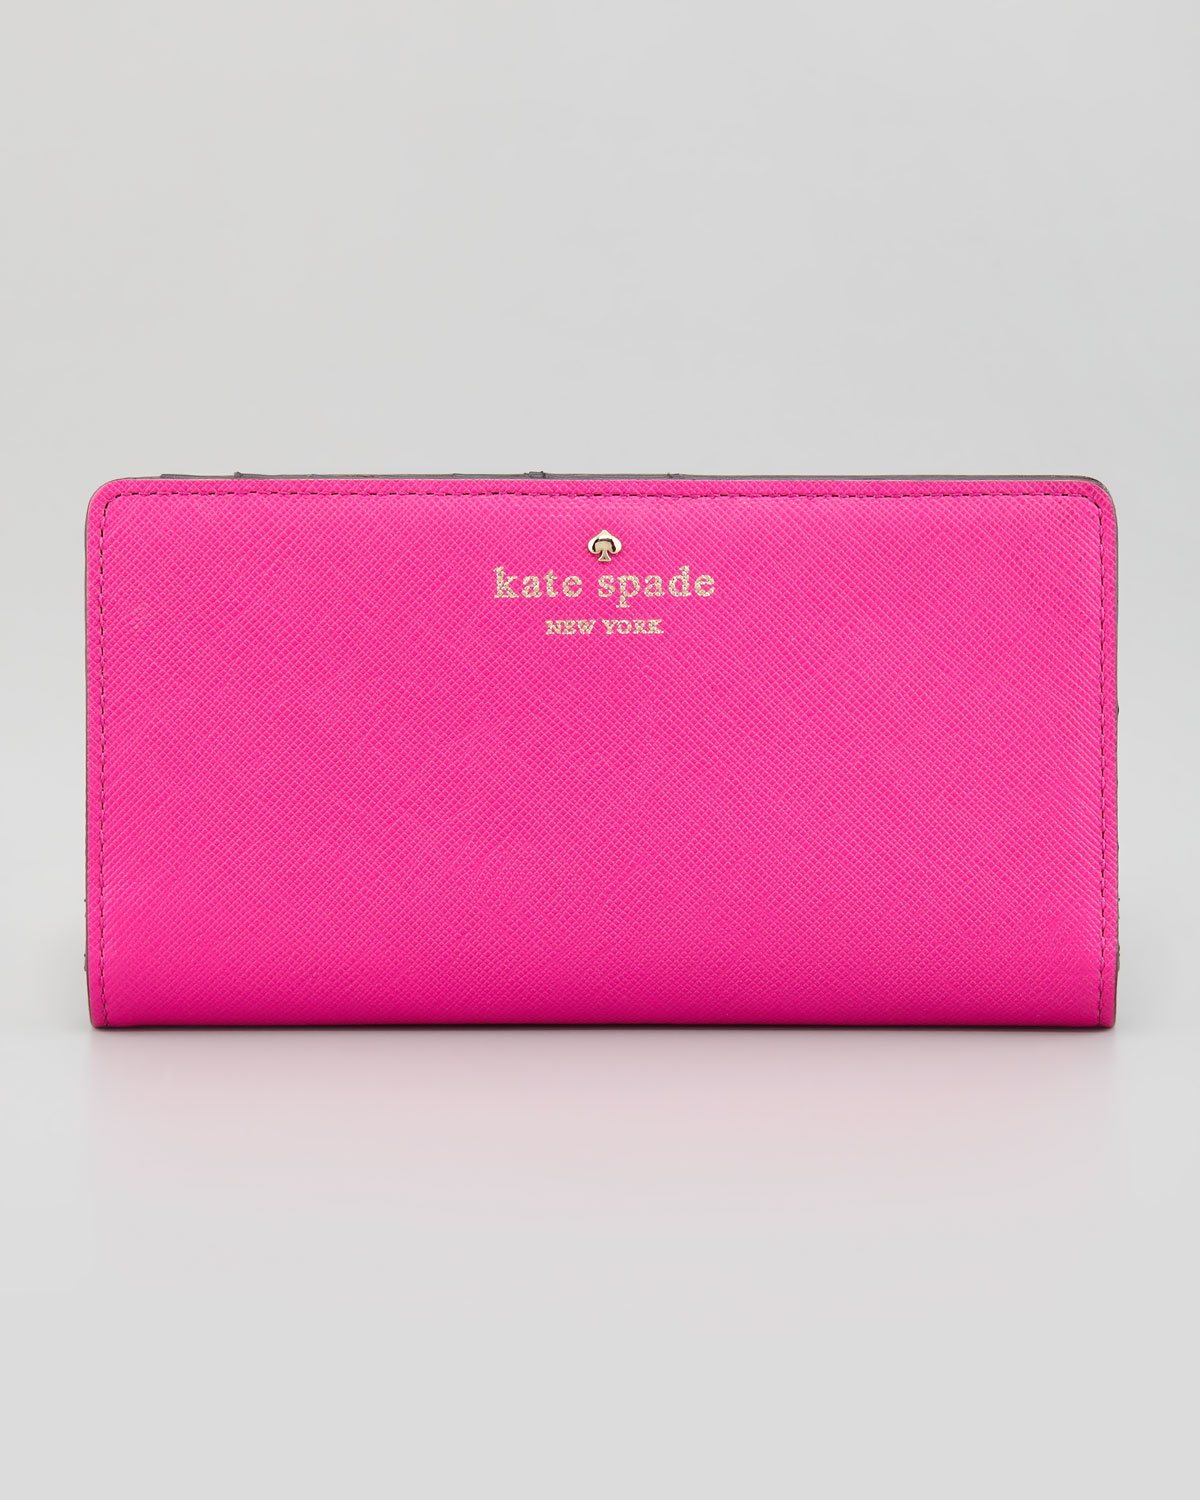 Lyst - Kate spade new york Cherry Lane Stacy Wallet Pink in Pink